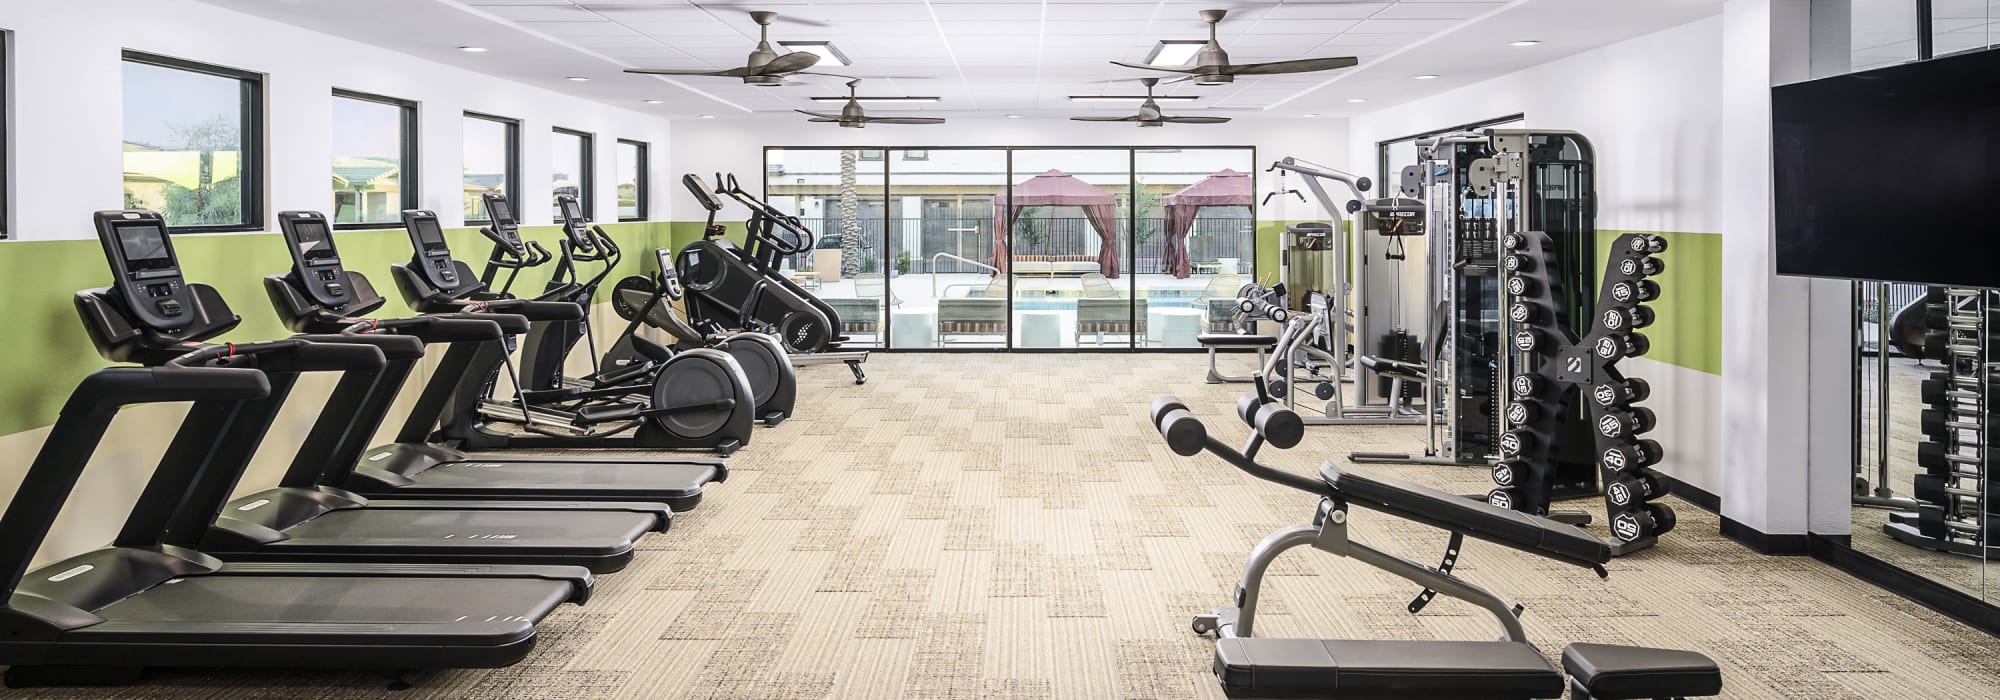 Fitness center at Sanctuary on 51st in Laveen, Arizona